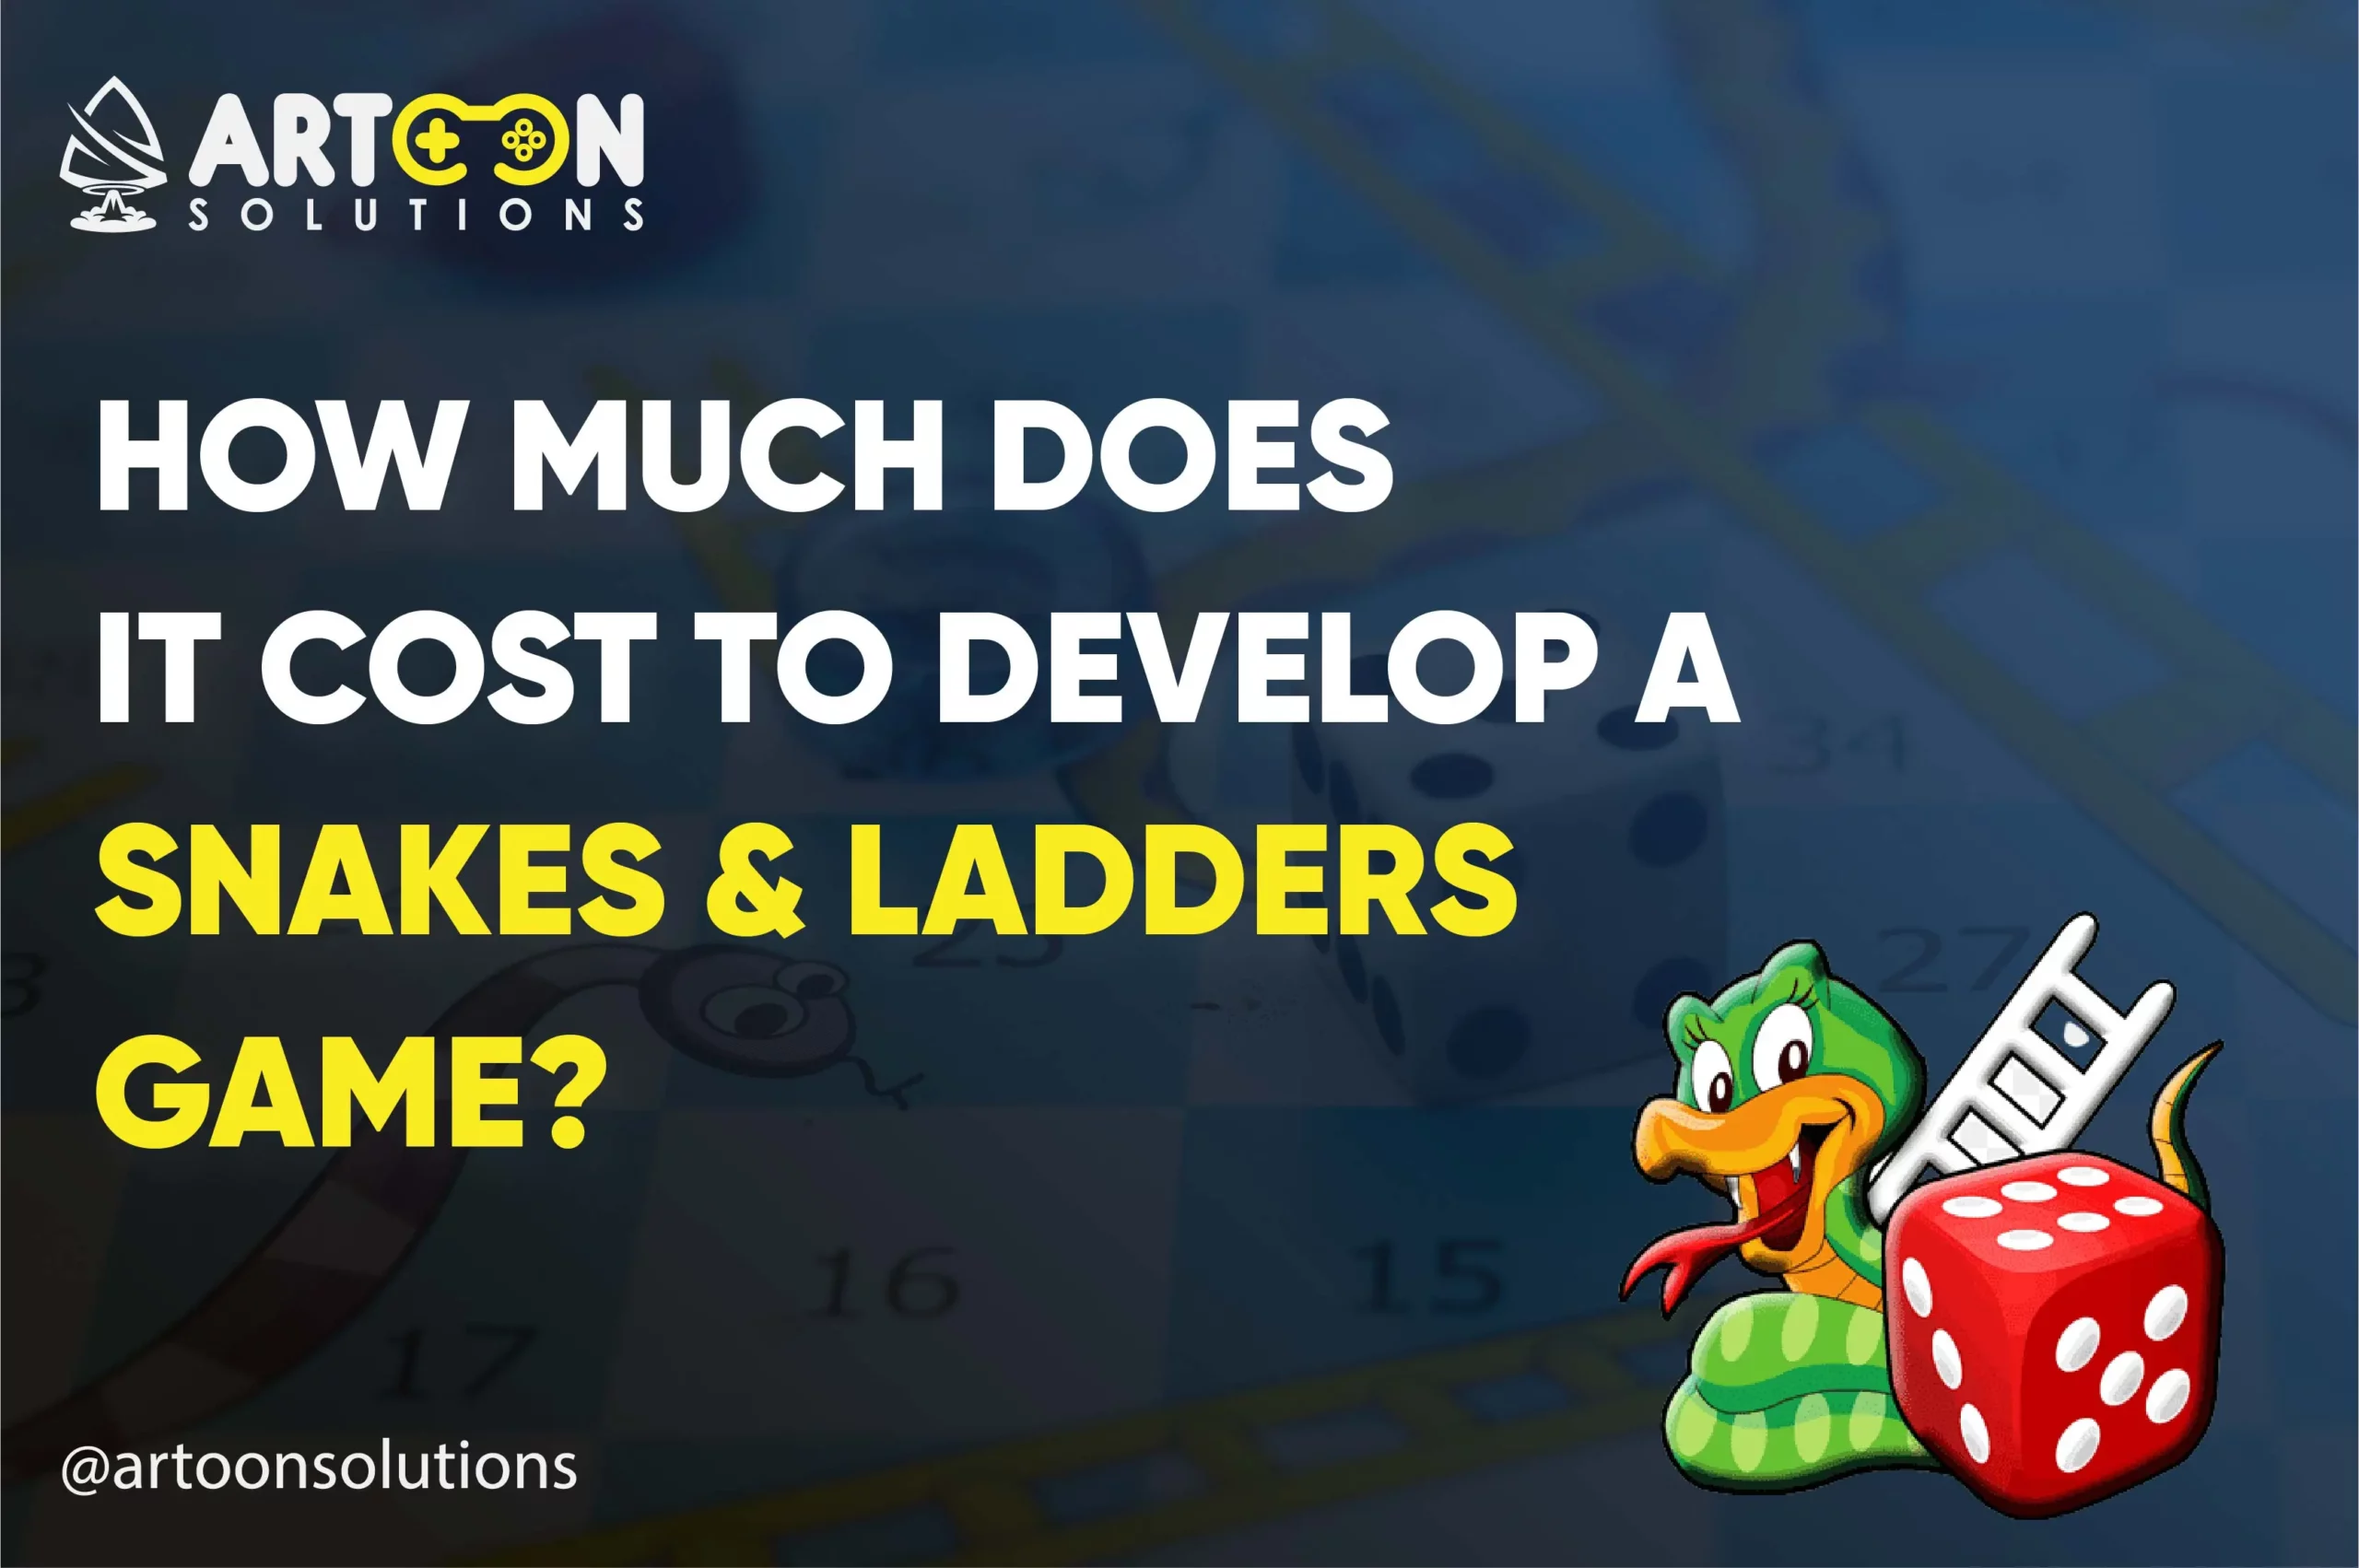 How Much Does it Cost to Develop Snakes & Ladders Game